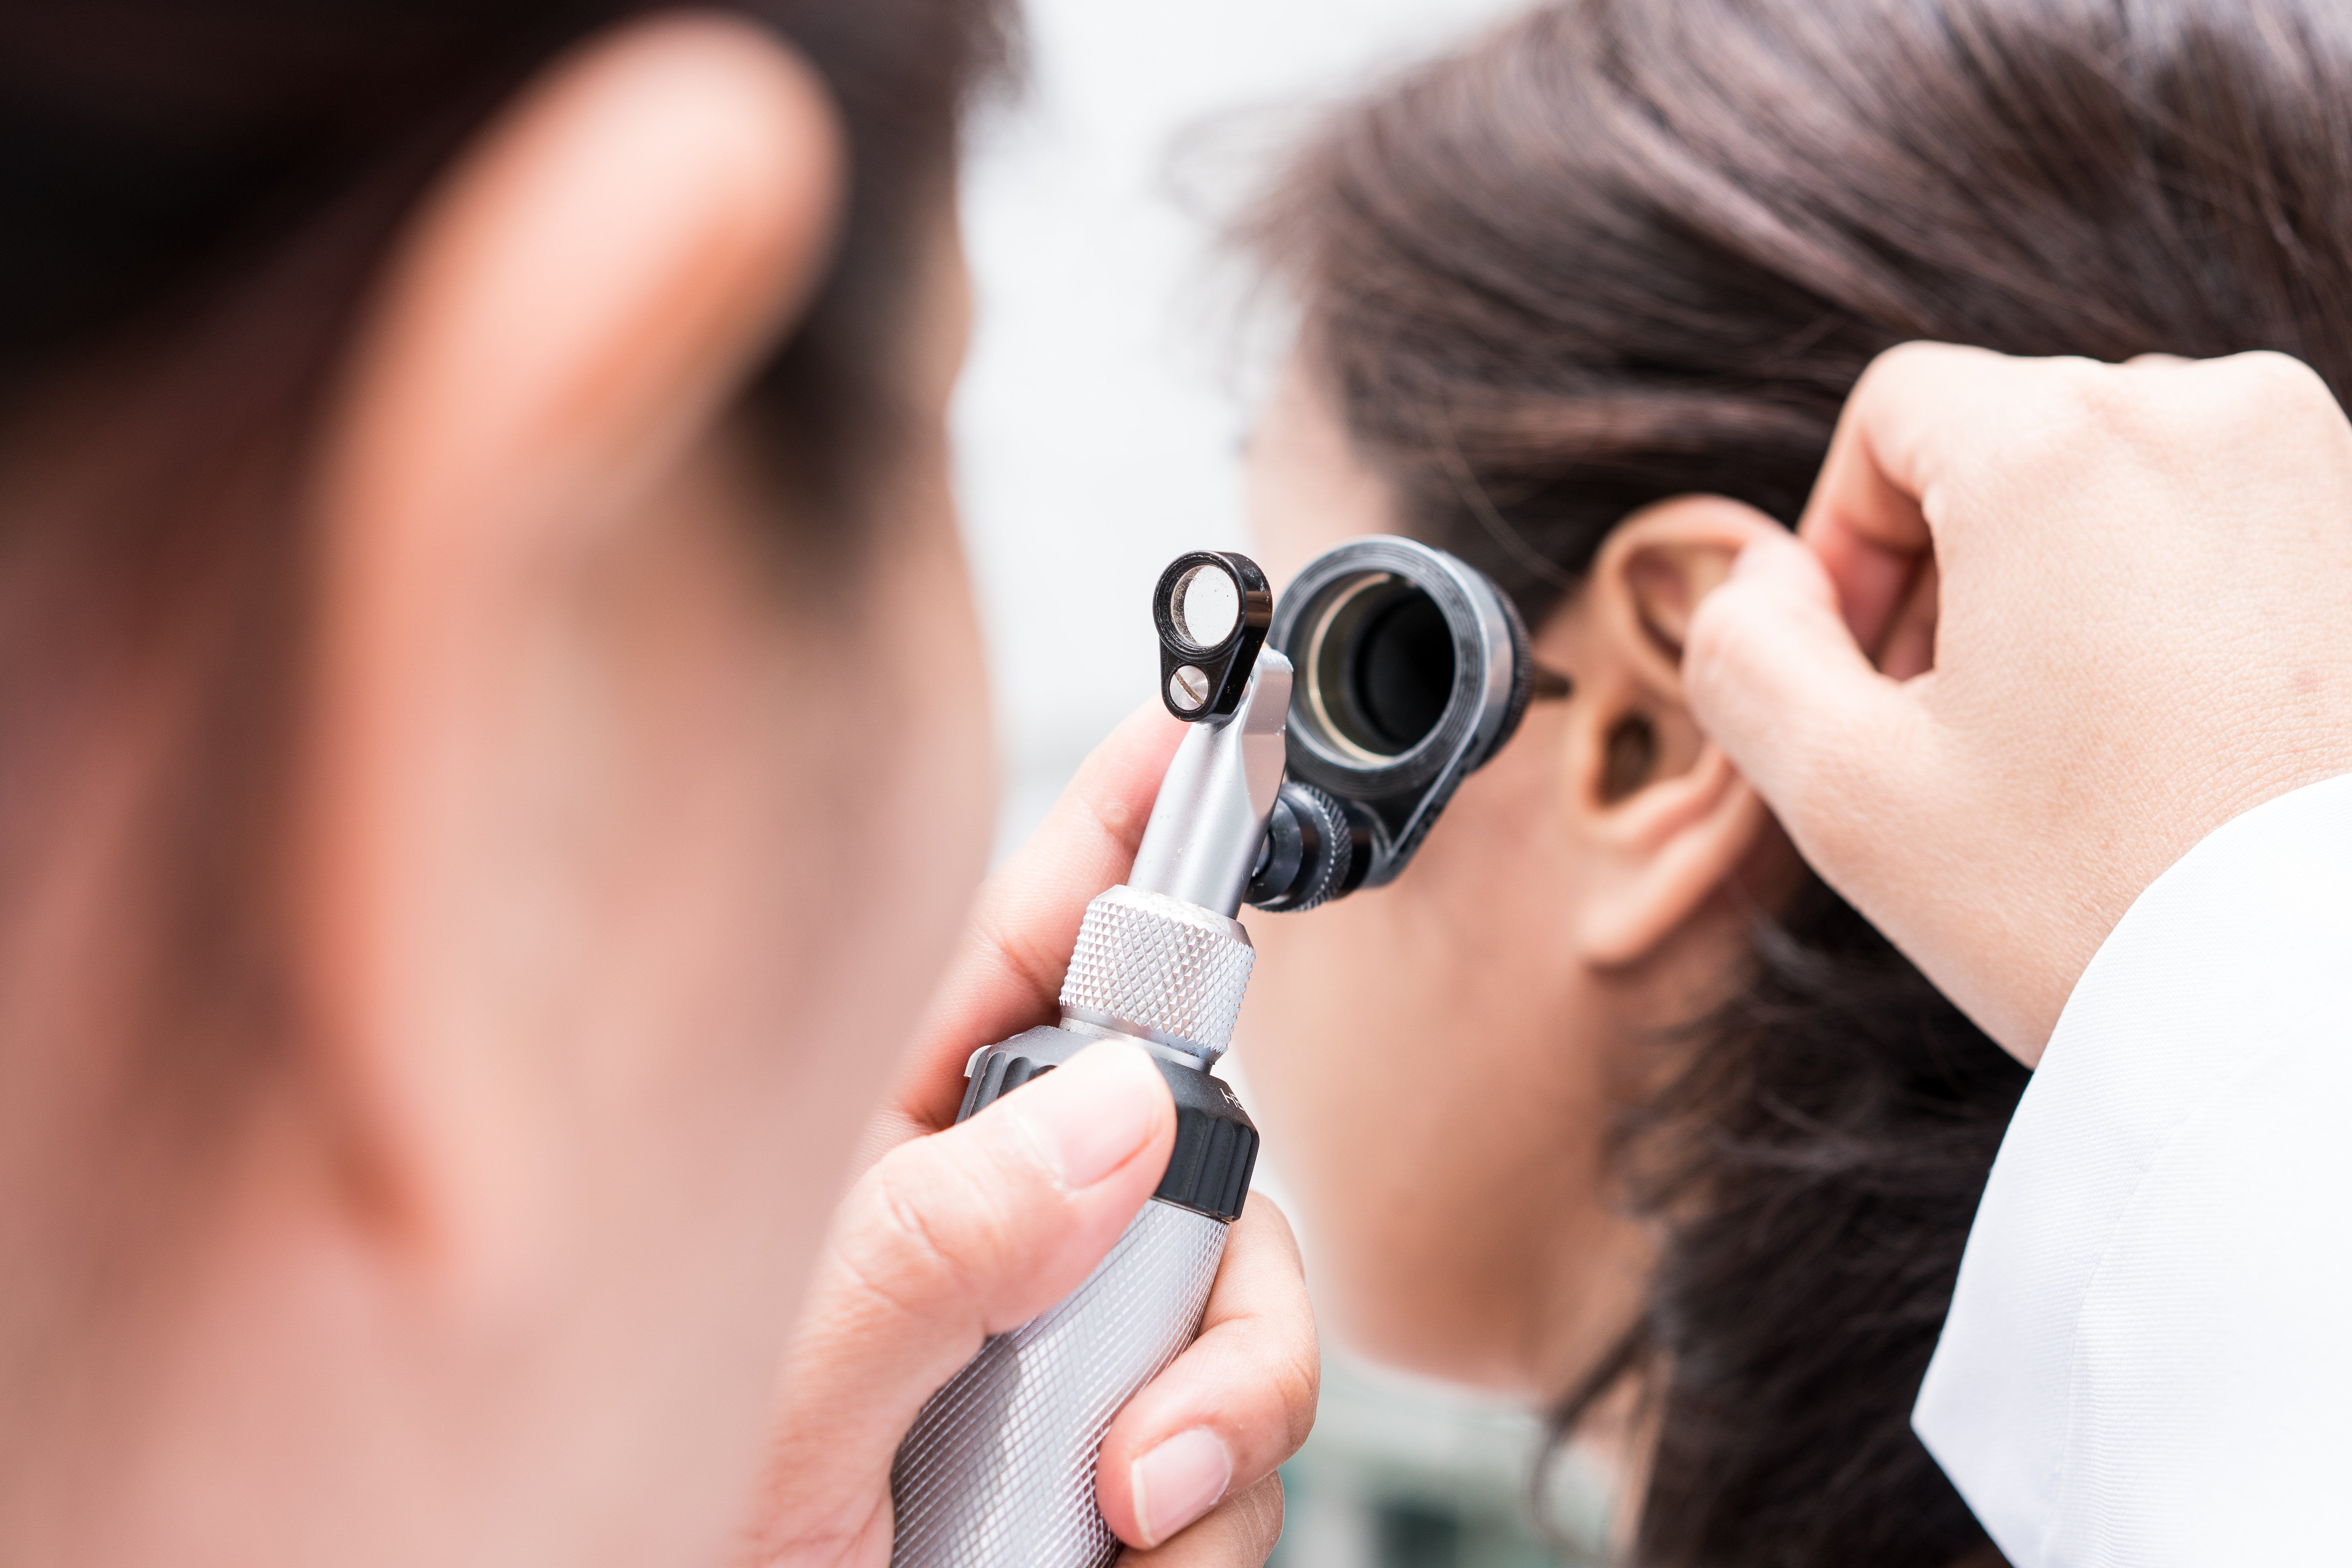 Have your ears properly cleaned by a physician